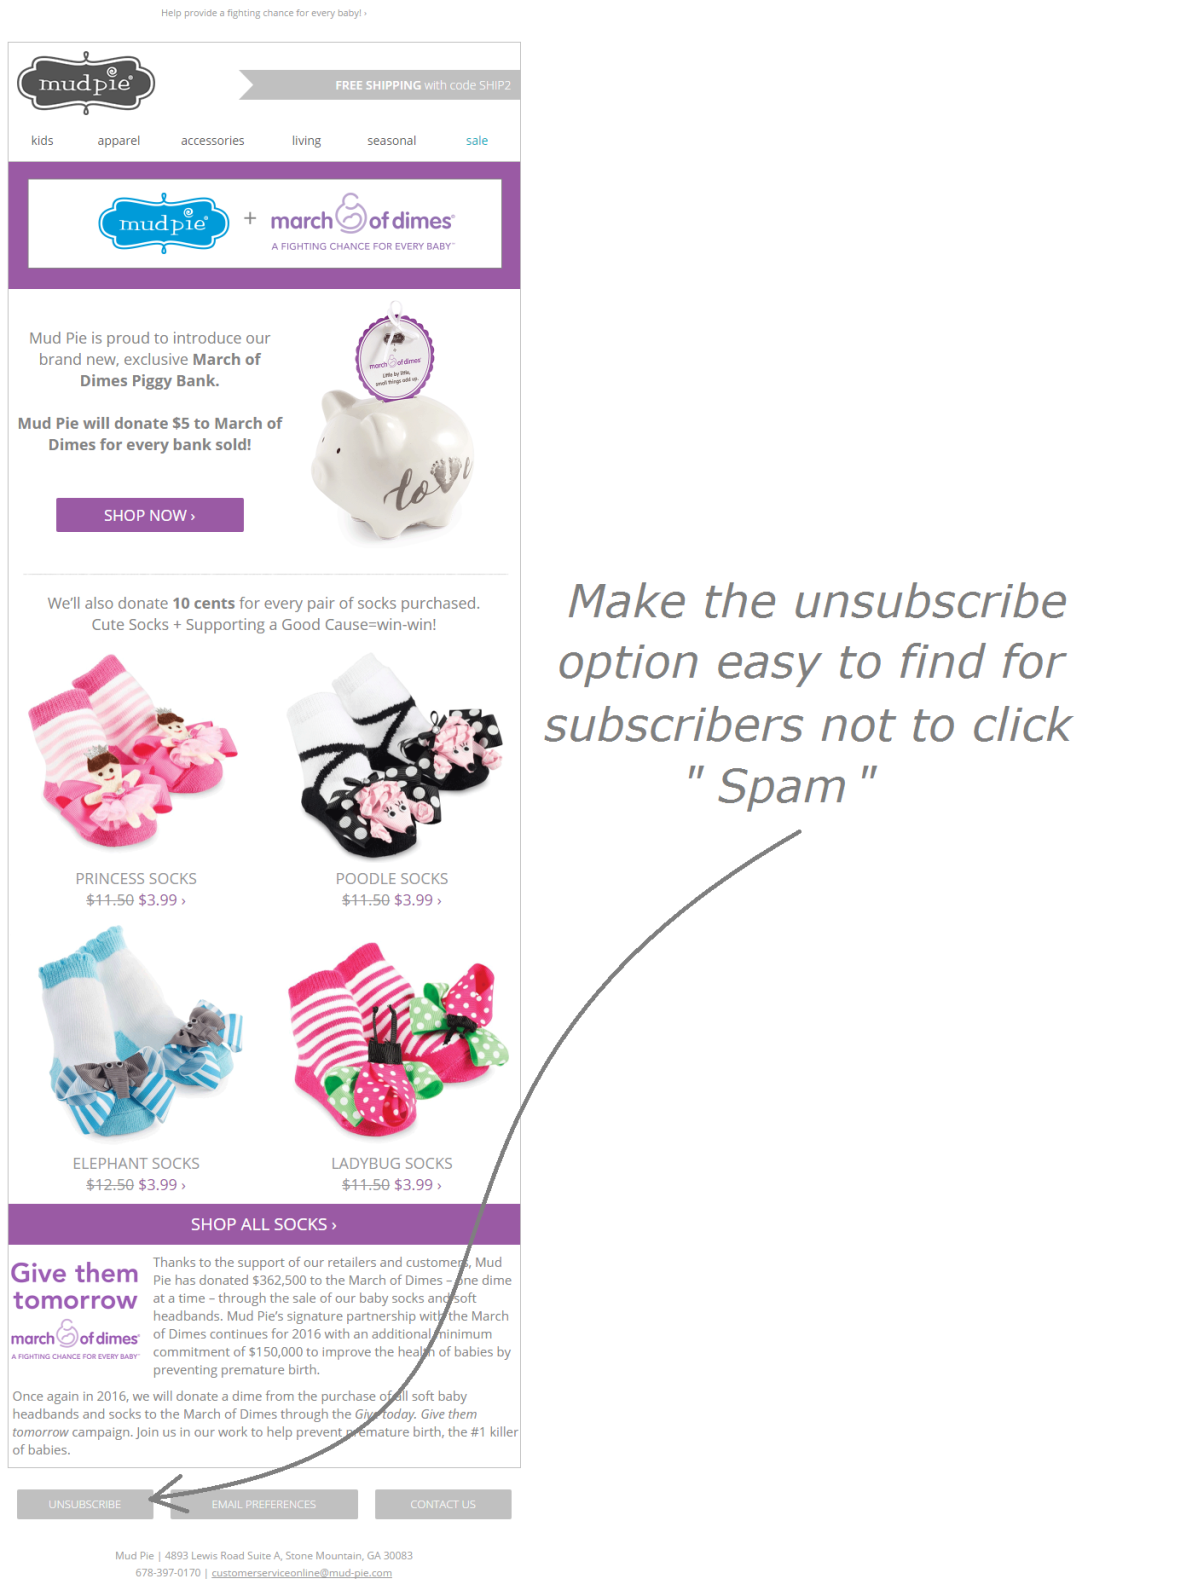 Make an unsubscribe link easy to find